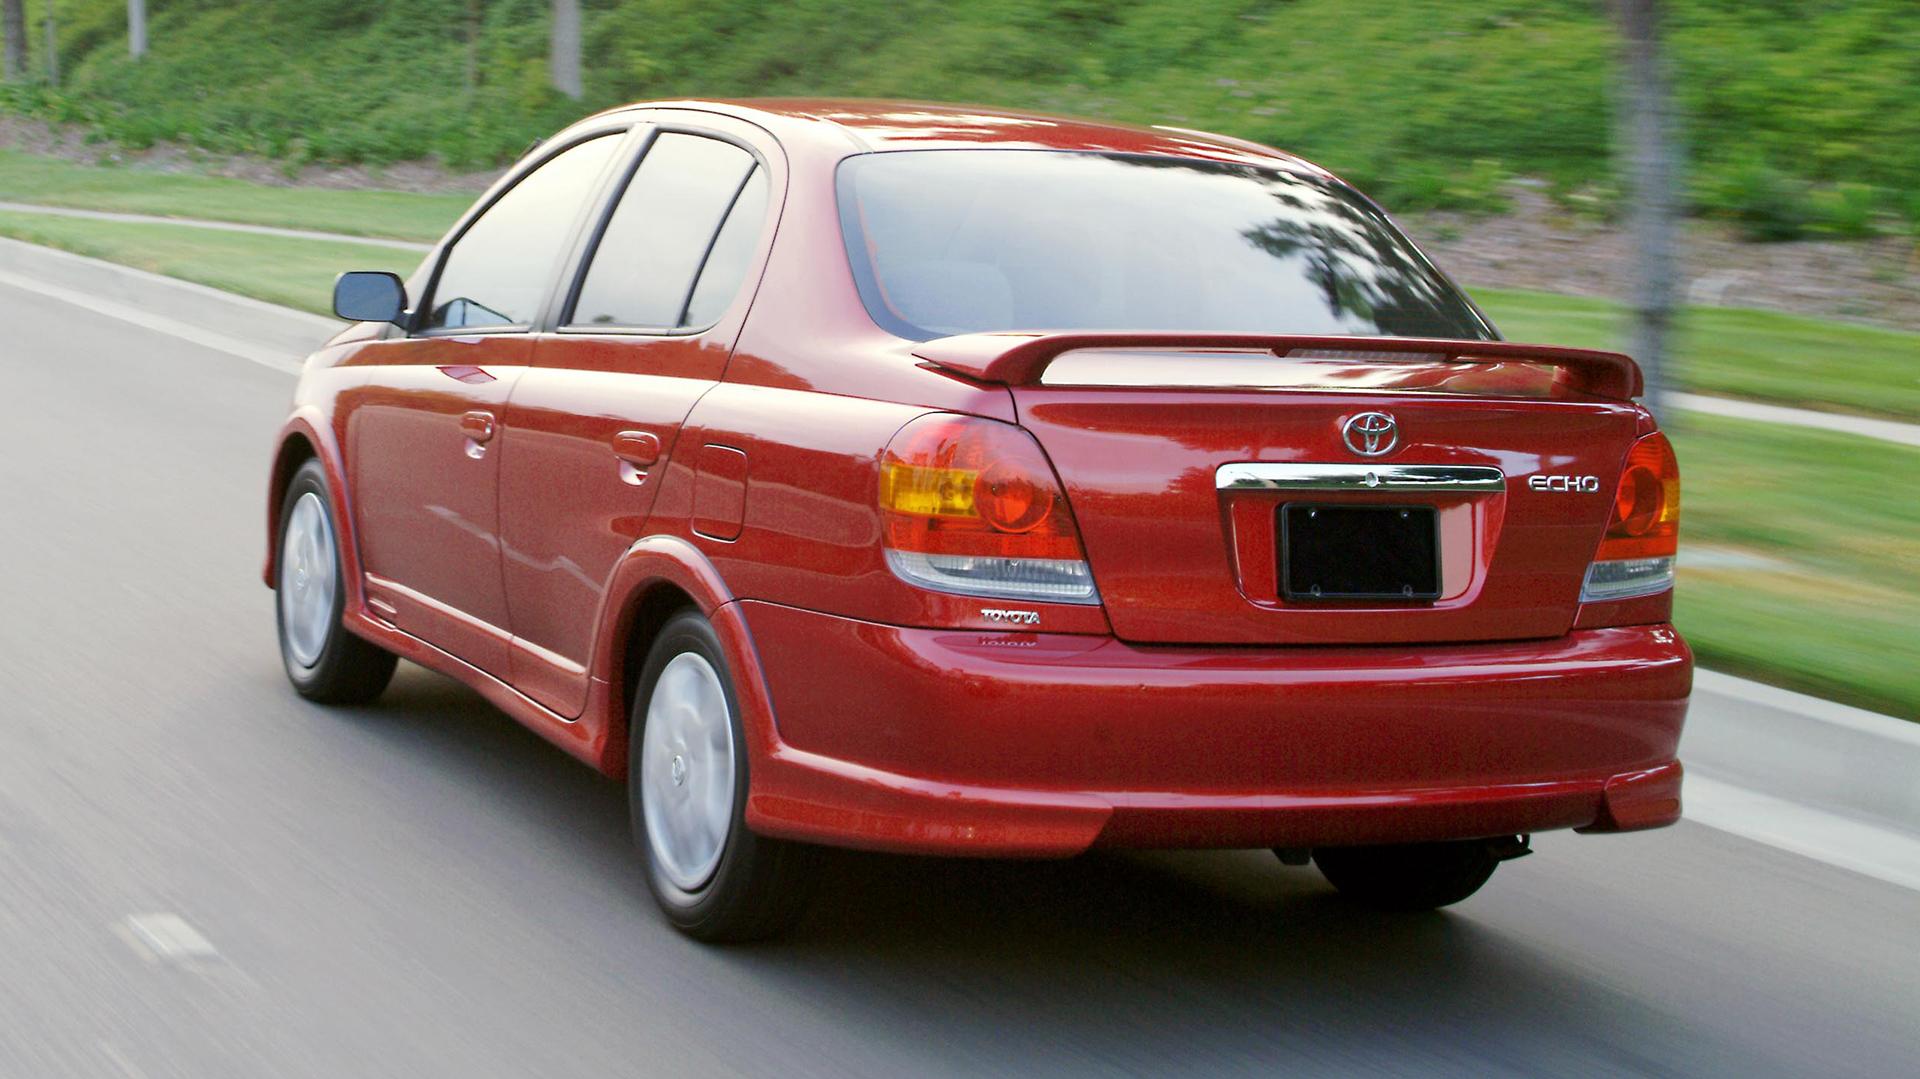 Toyota USA on Twitter: "So fast, all you hear is the echo once it's gone.  #TBT 2004 #Echo #LetsGoPlaces https://t.co/xXFWEEokLN" / Twitter